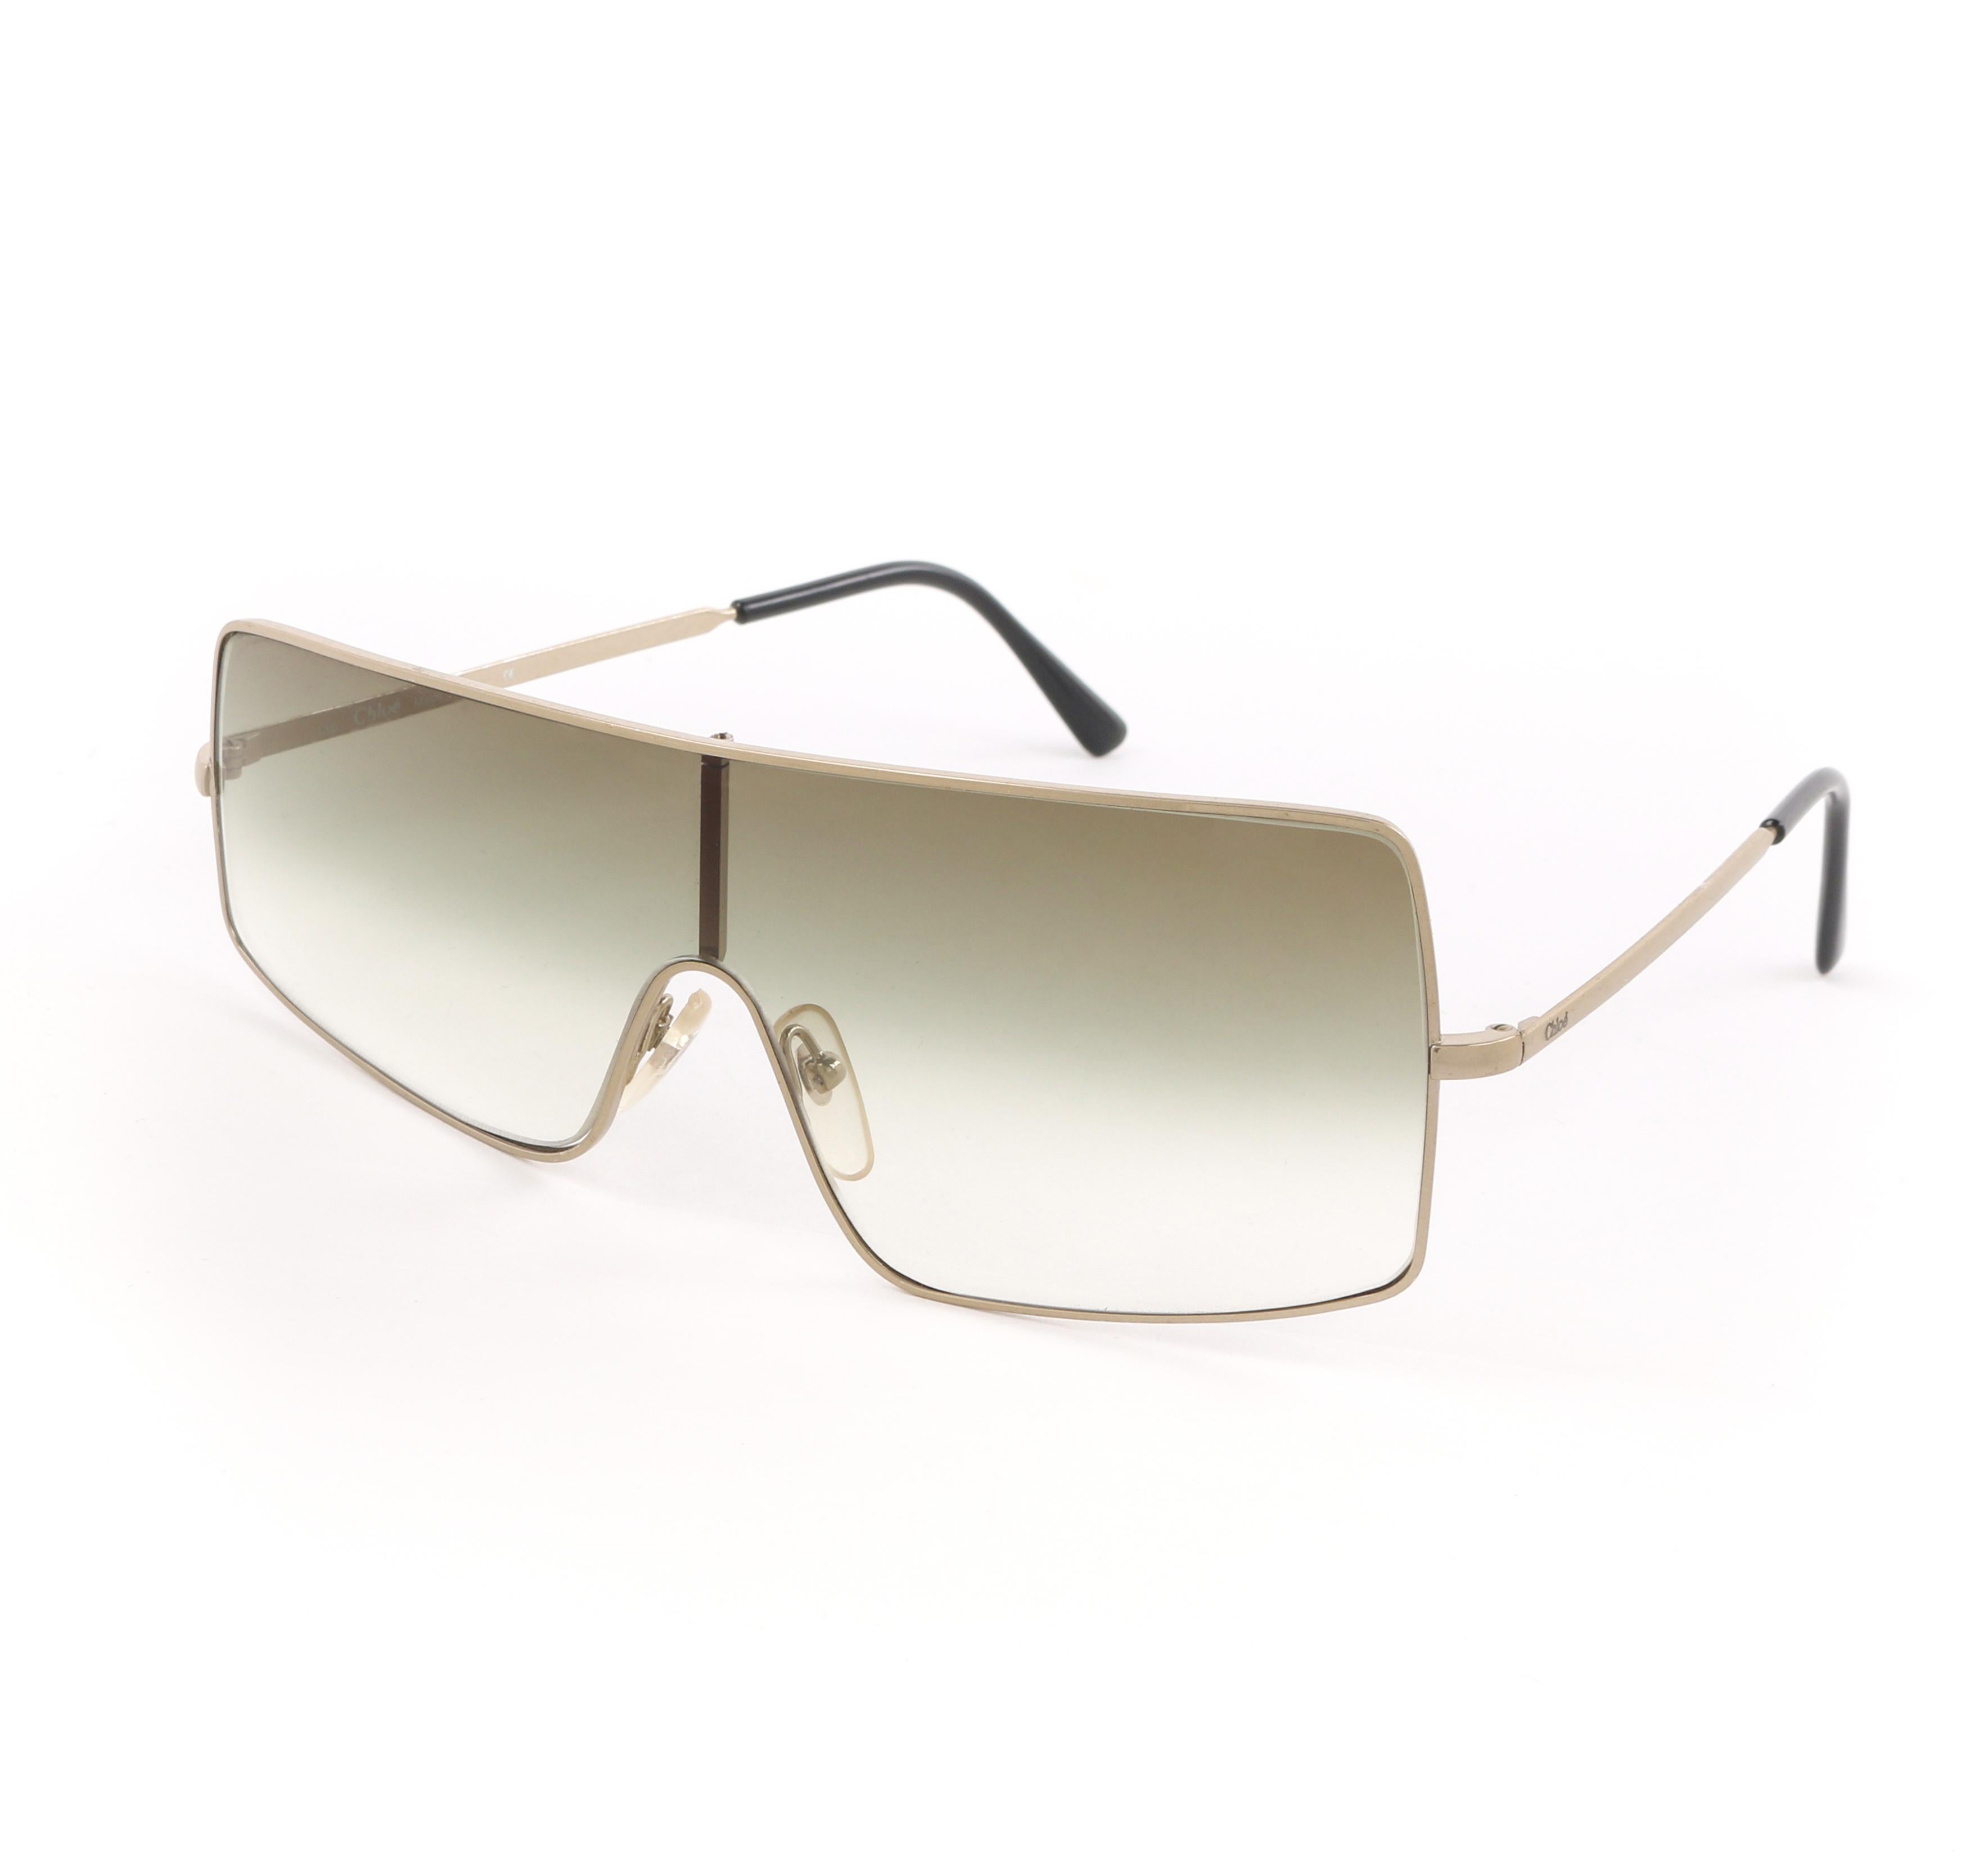 DESCRIPTION: CHLOE S/S 2001 Gold Asymmetrical Wire Frame Shield Sunglasses 76S
 
Brand / Manufacturer: Chloe
Collection: Spring / Summer 2001
Designer: Stella McCartney 
Style: Shield sunglasses
Color(s): Shades of gold and green
Unmarked Material